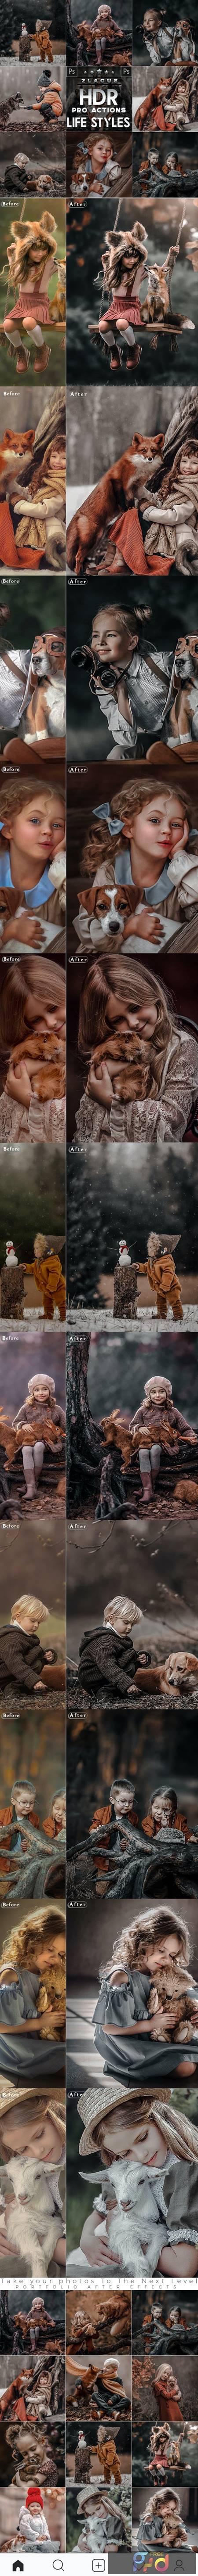 PRO HDR Photoshop Actions